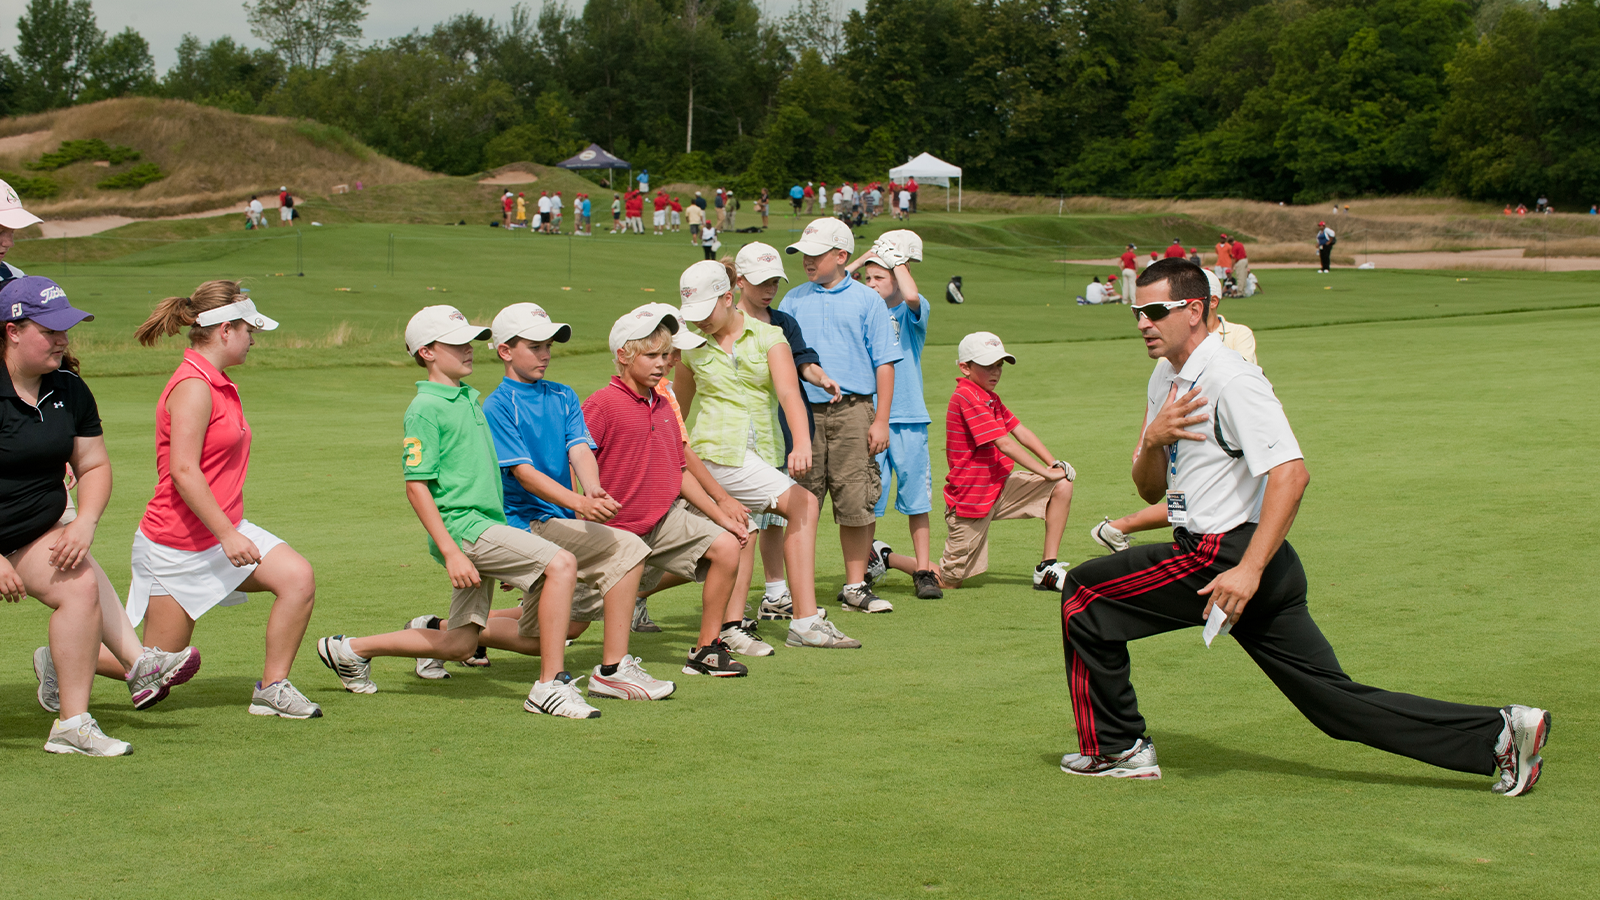 David Donatucci works with Juniors on exercises during a Youth Clinic. (Photo by Montana Pritchard/The PGA of America)